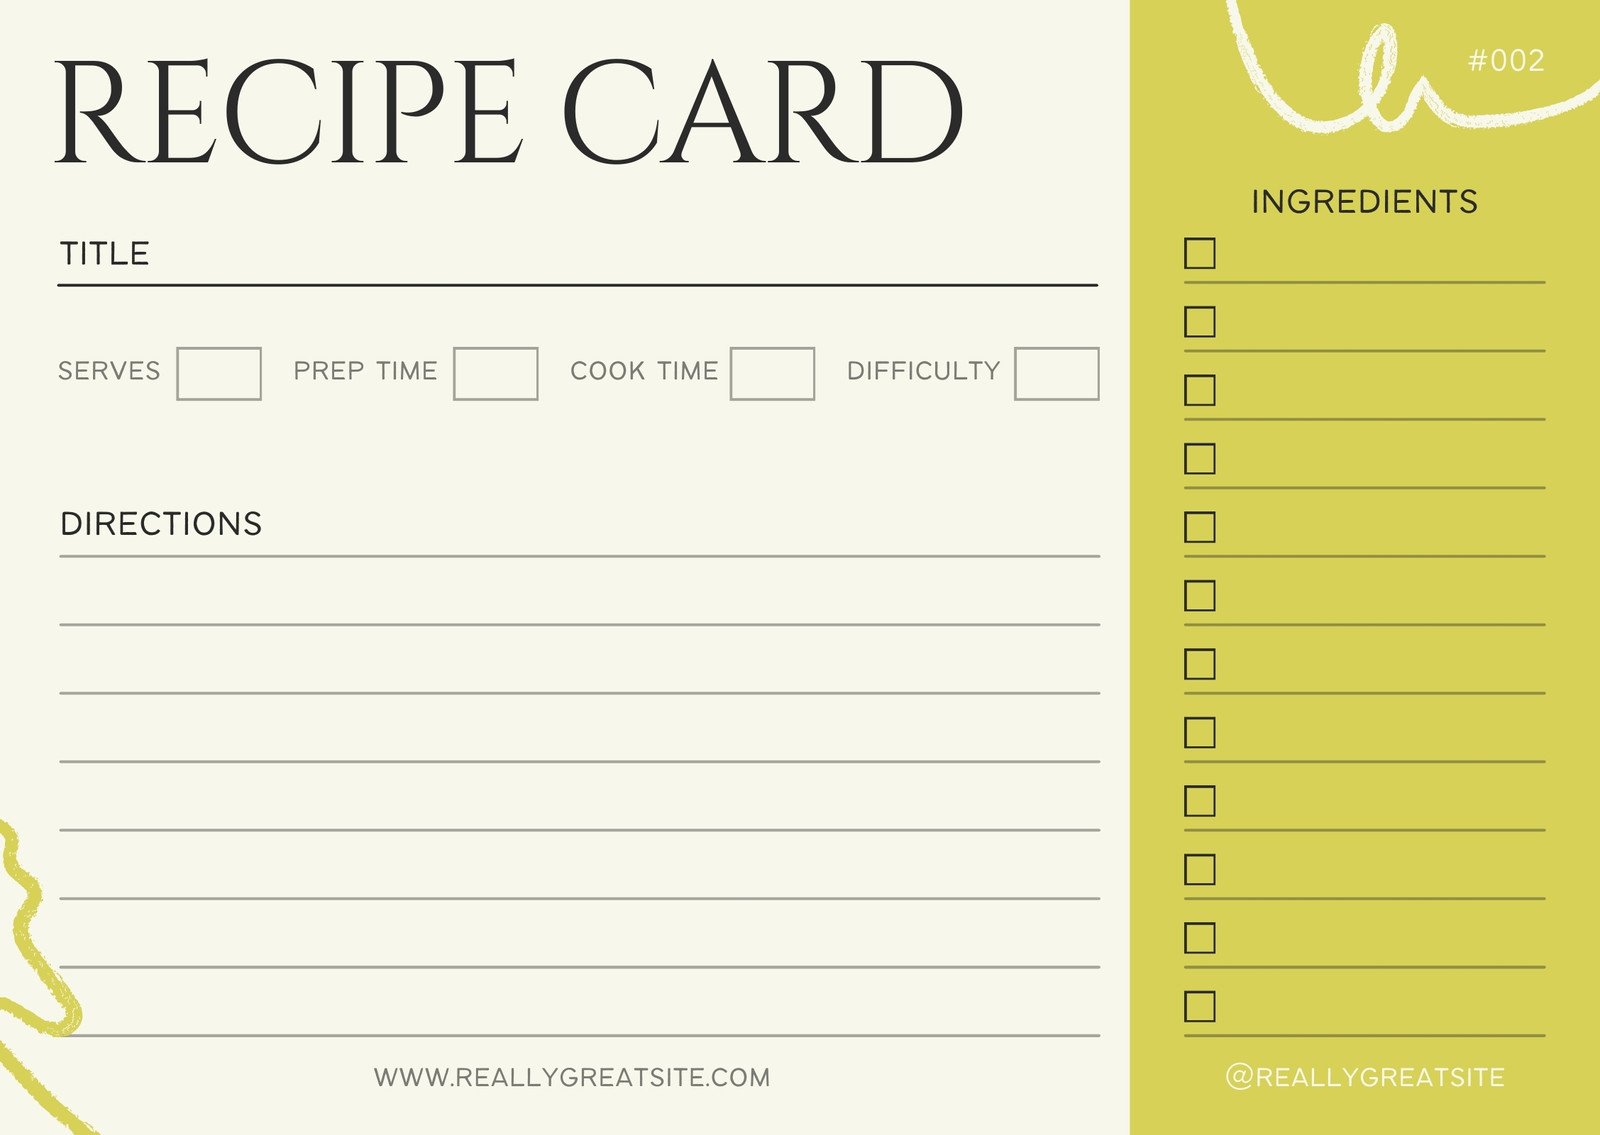 Free Printables Online - printable ticket templates, recipe cards & more